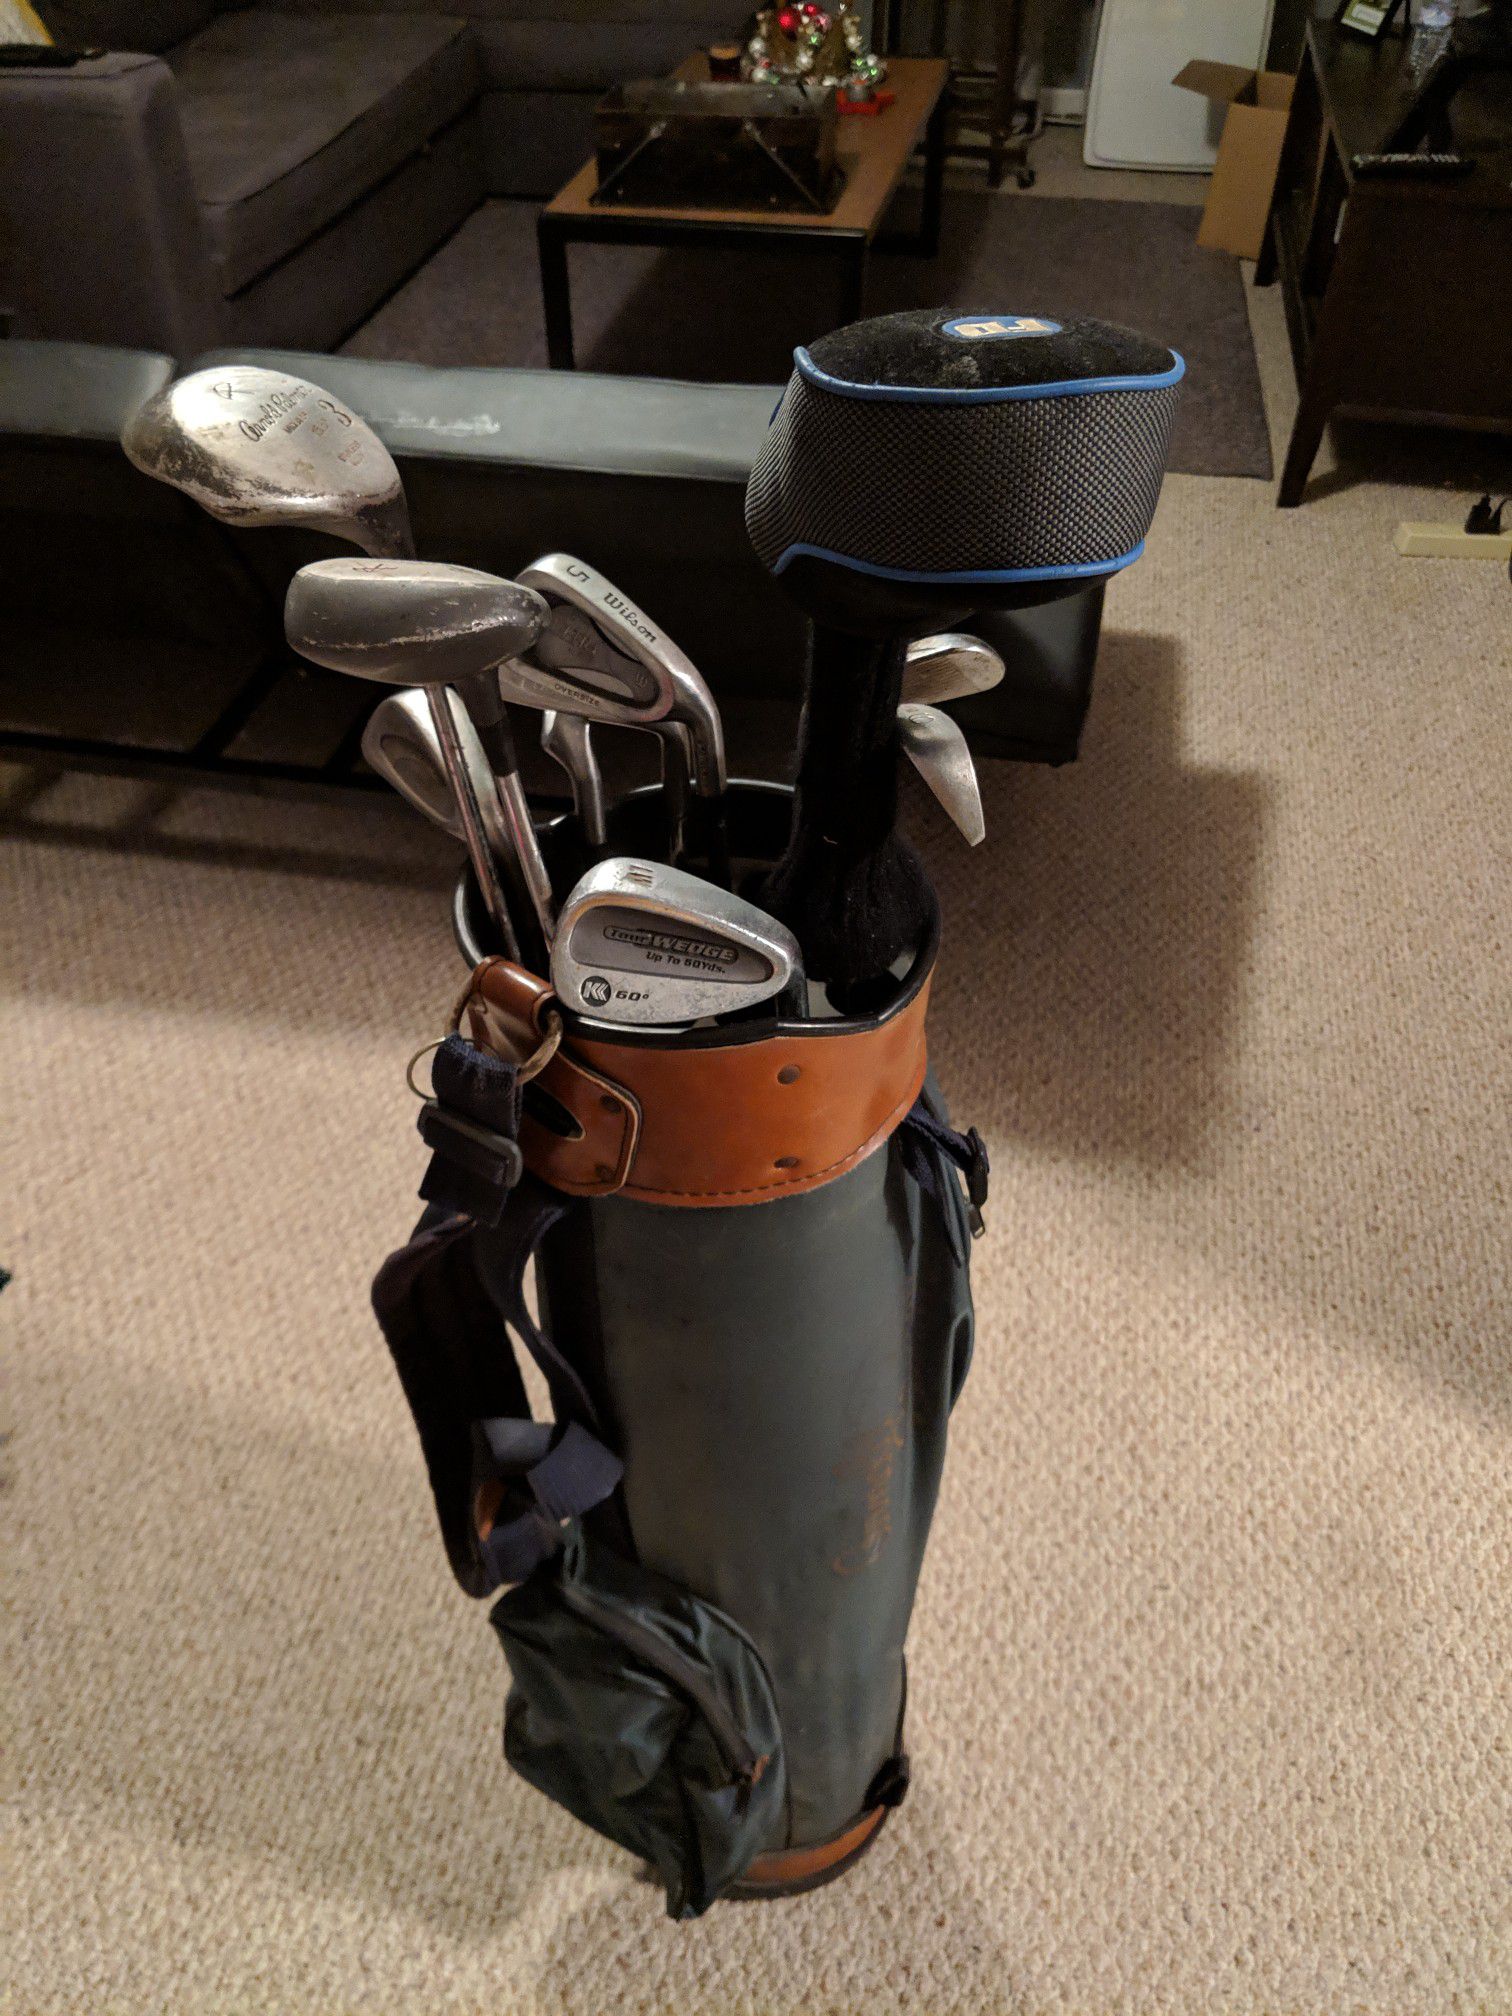 Arnold palmer golf bag with misc. clubs